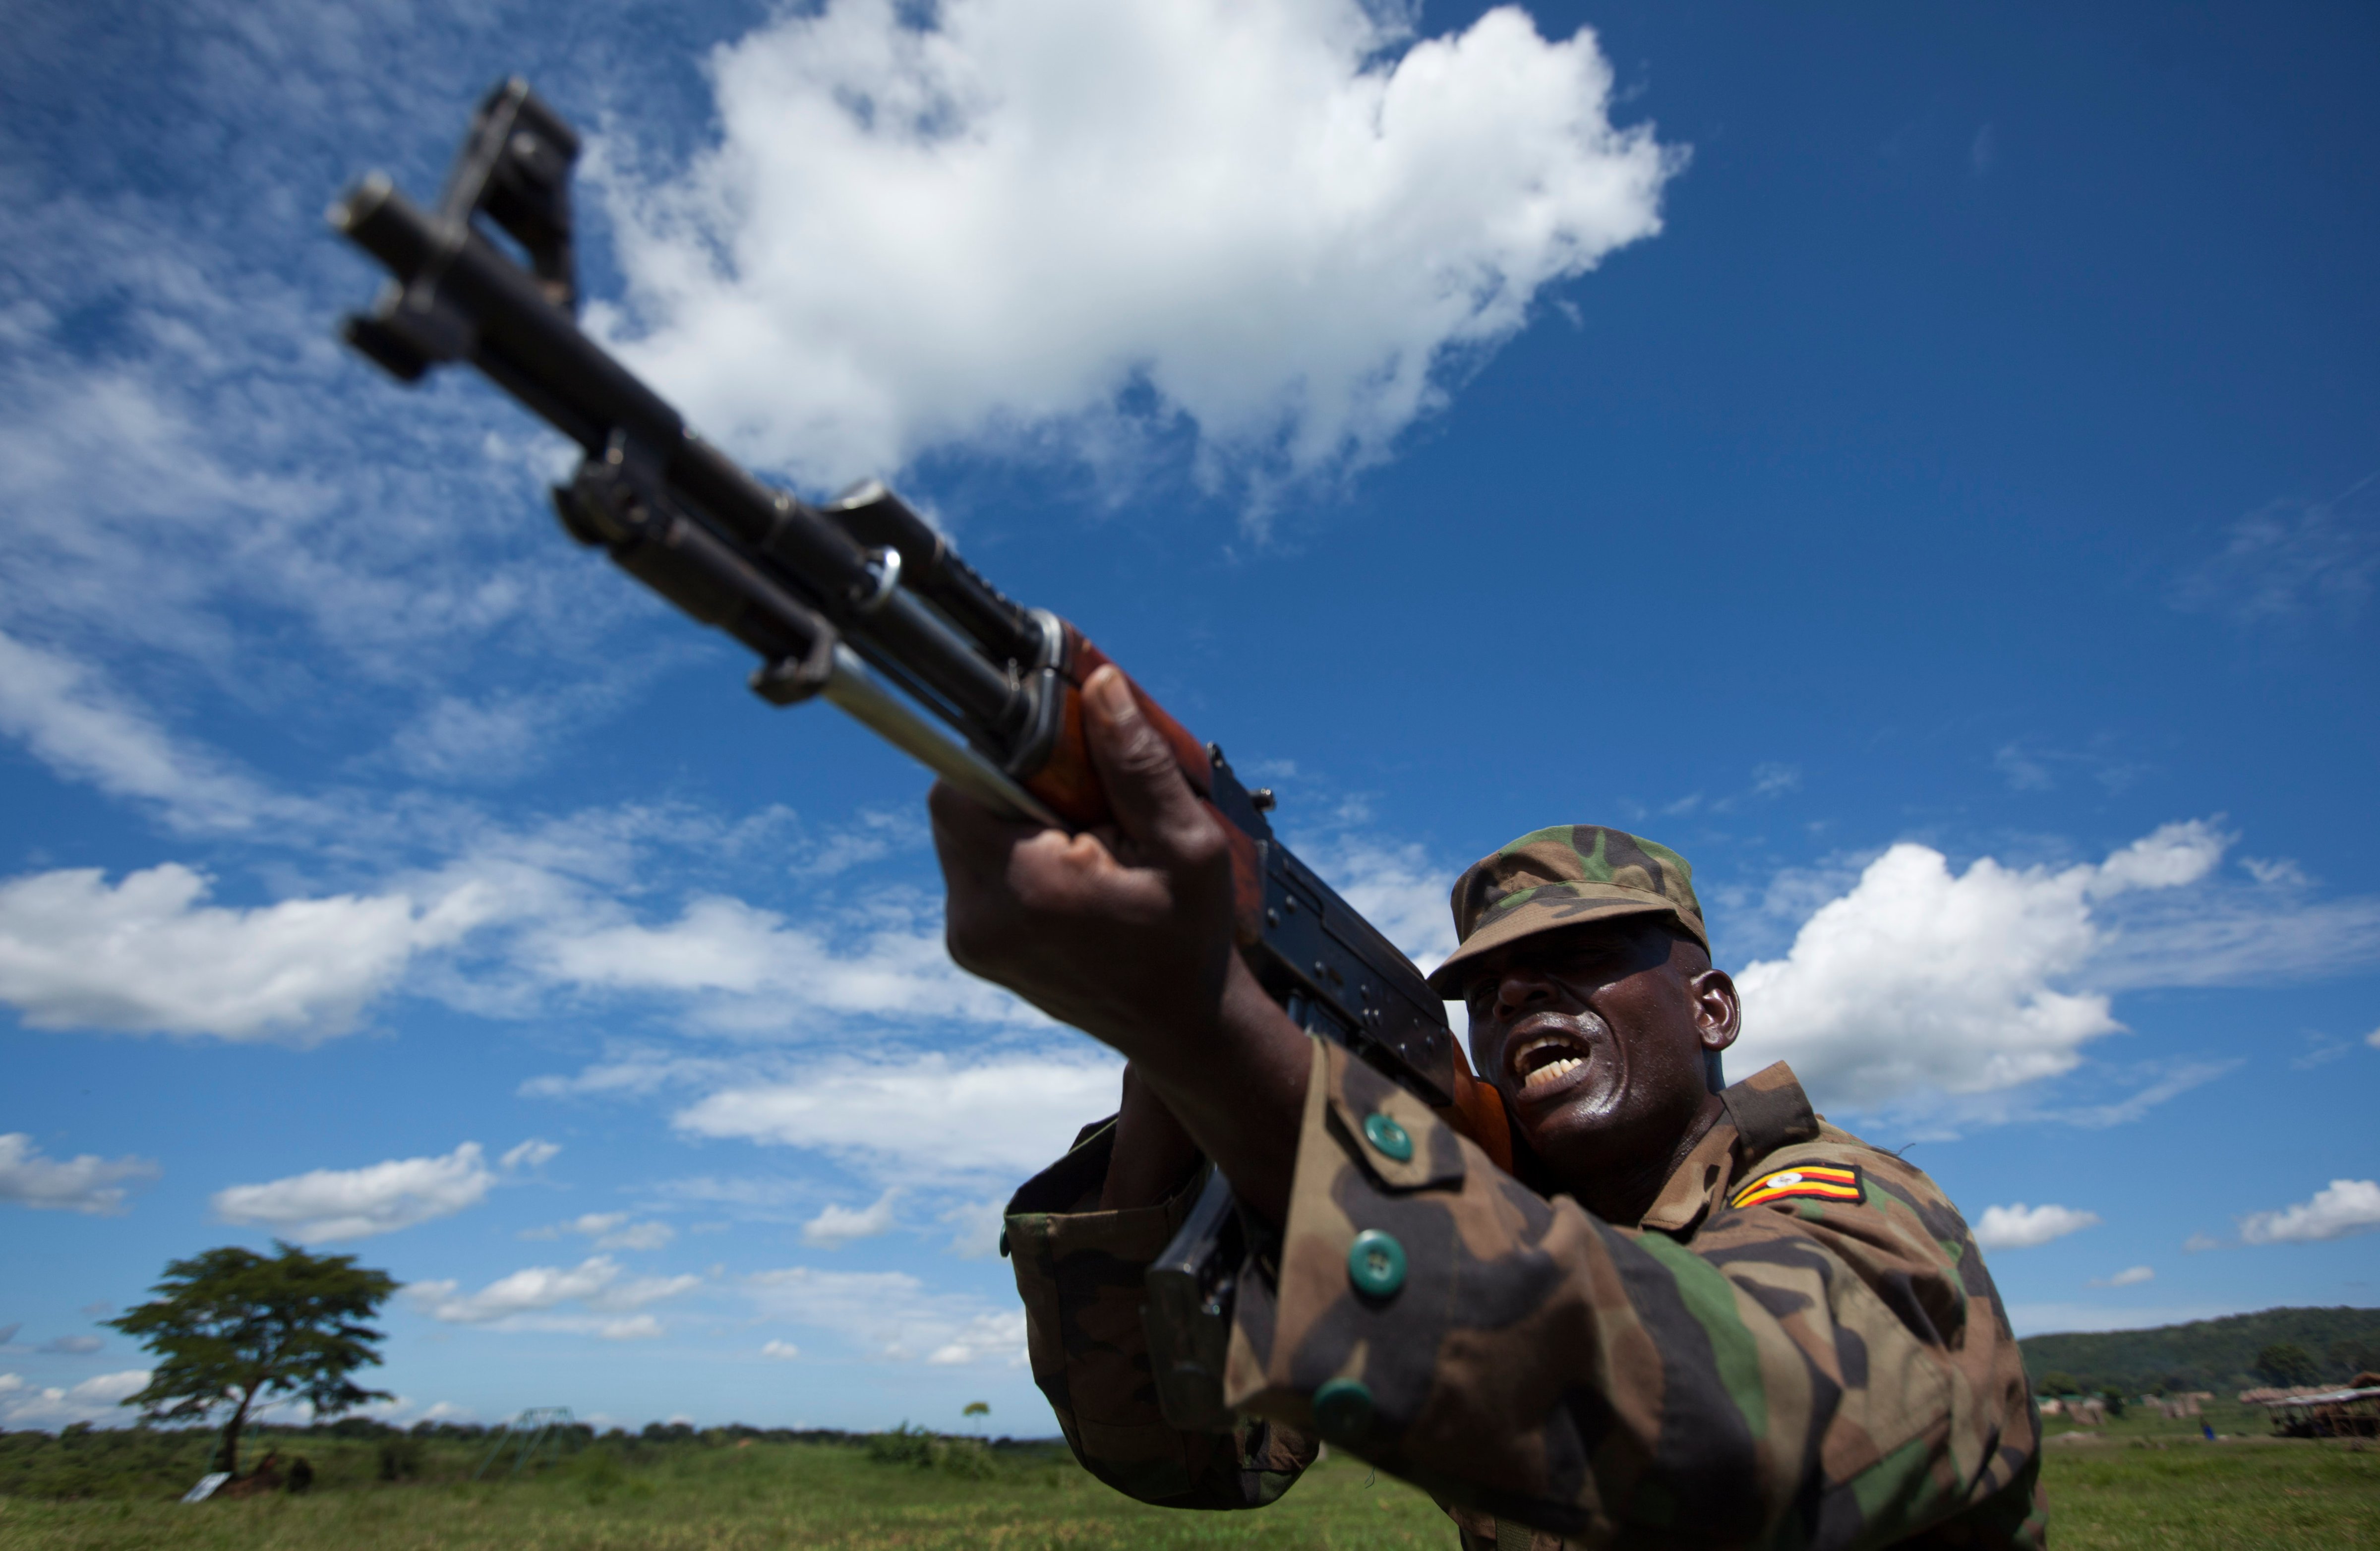 A soldier from the Uganda People's Defence Force (UPDF) engages in weapons training at the Singo training facility in Kakola, Uganda Monday, April 30, 2012. The camp provides different training courses run by the U.S. Marines and also by instructors contracted by the U.S. State Department. (Ben Curtis—ASSOCIATED PRESS)